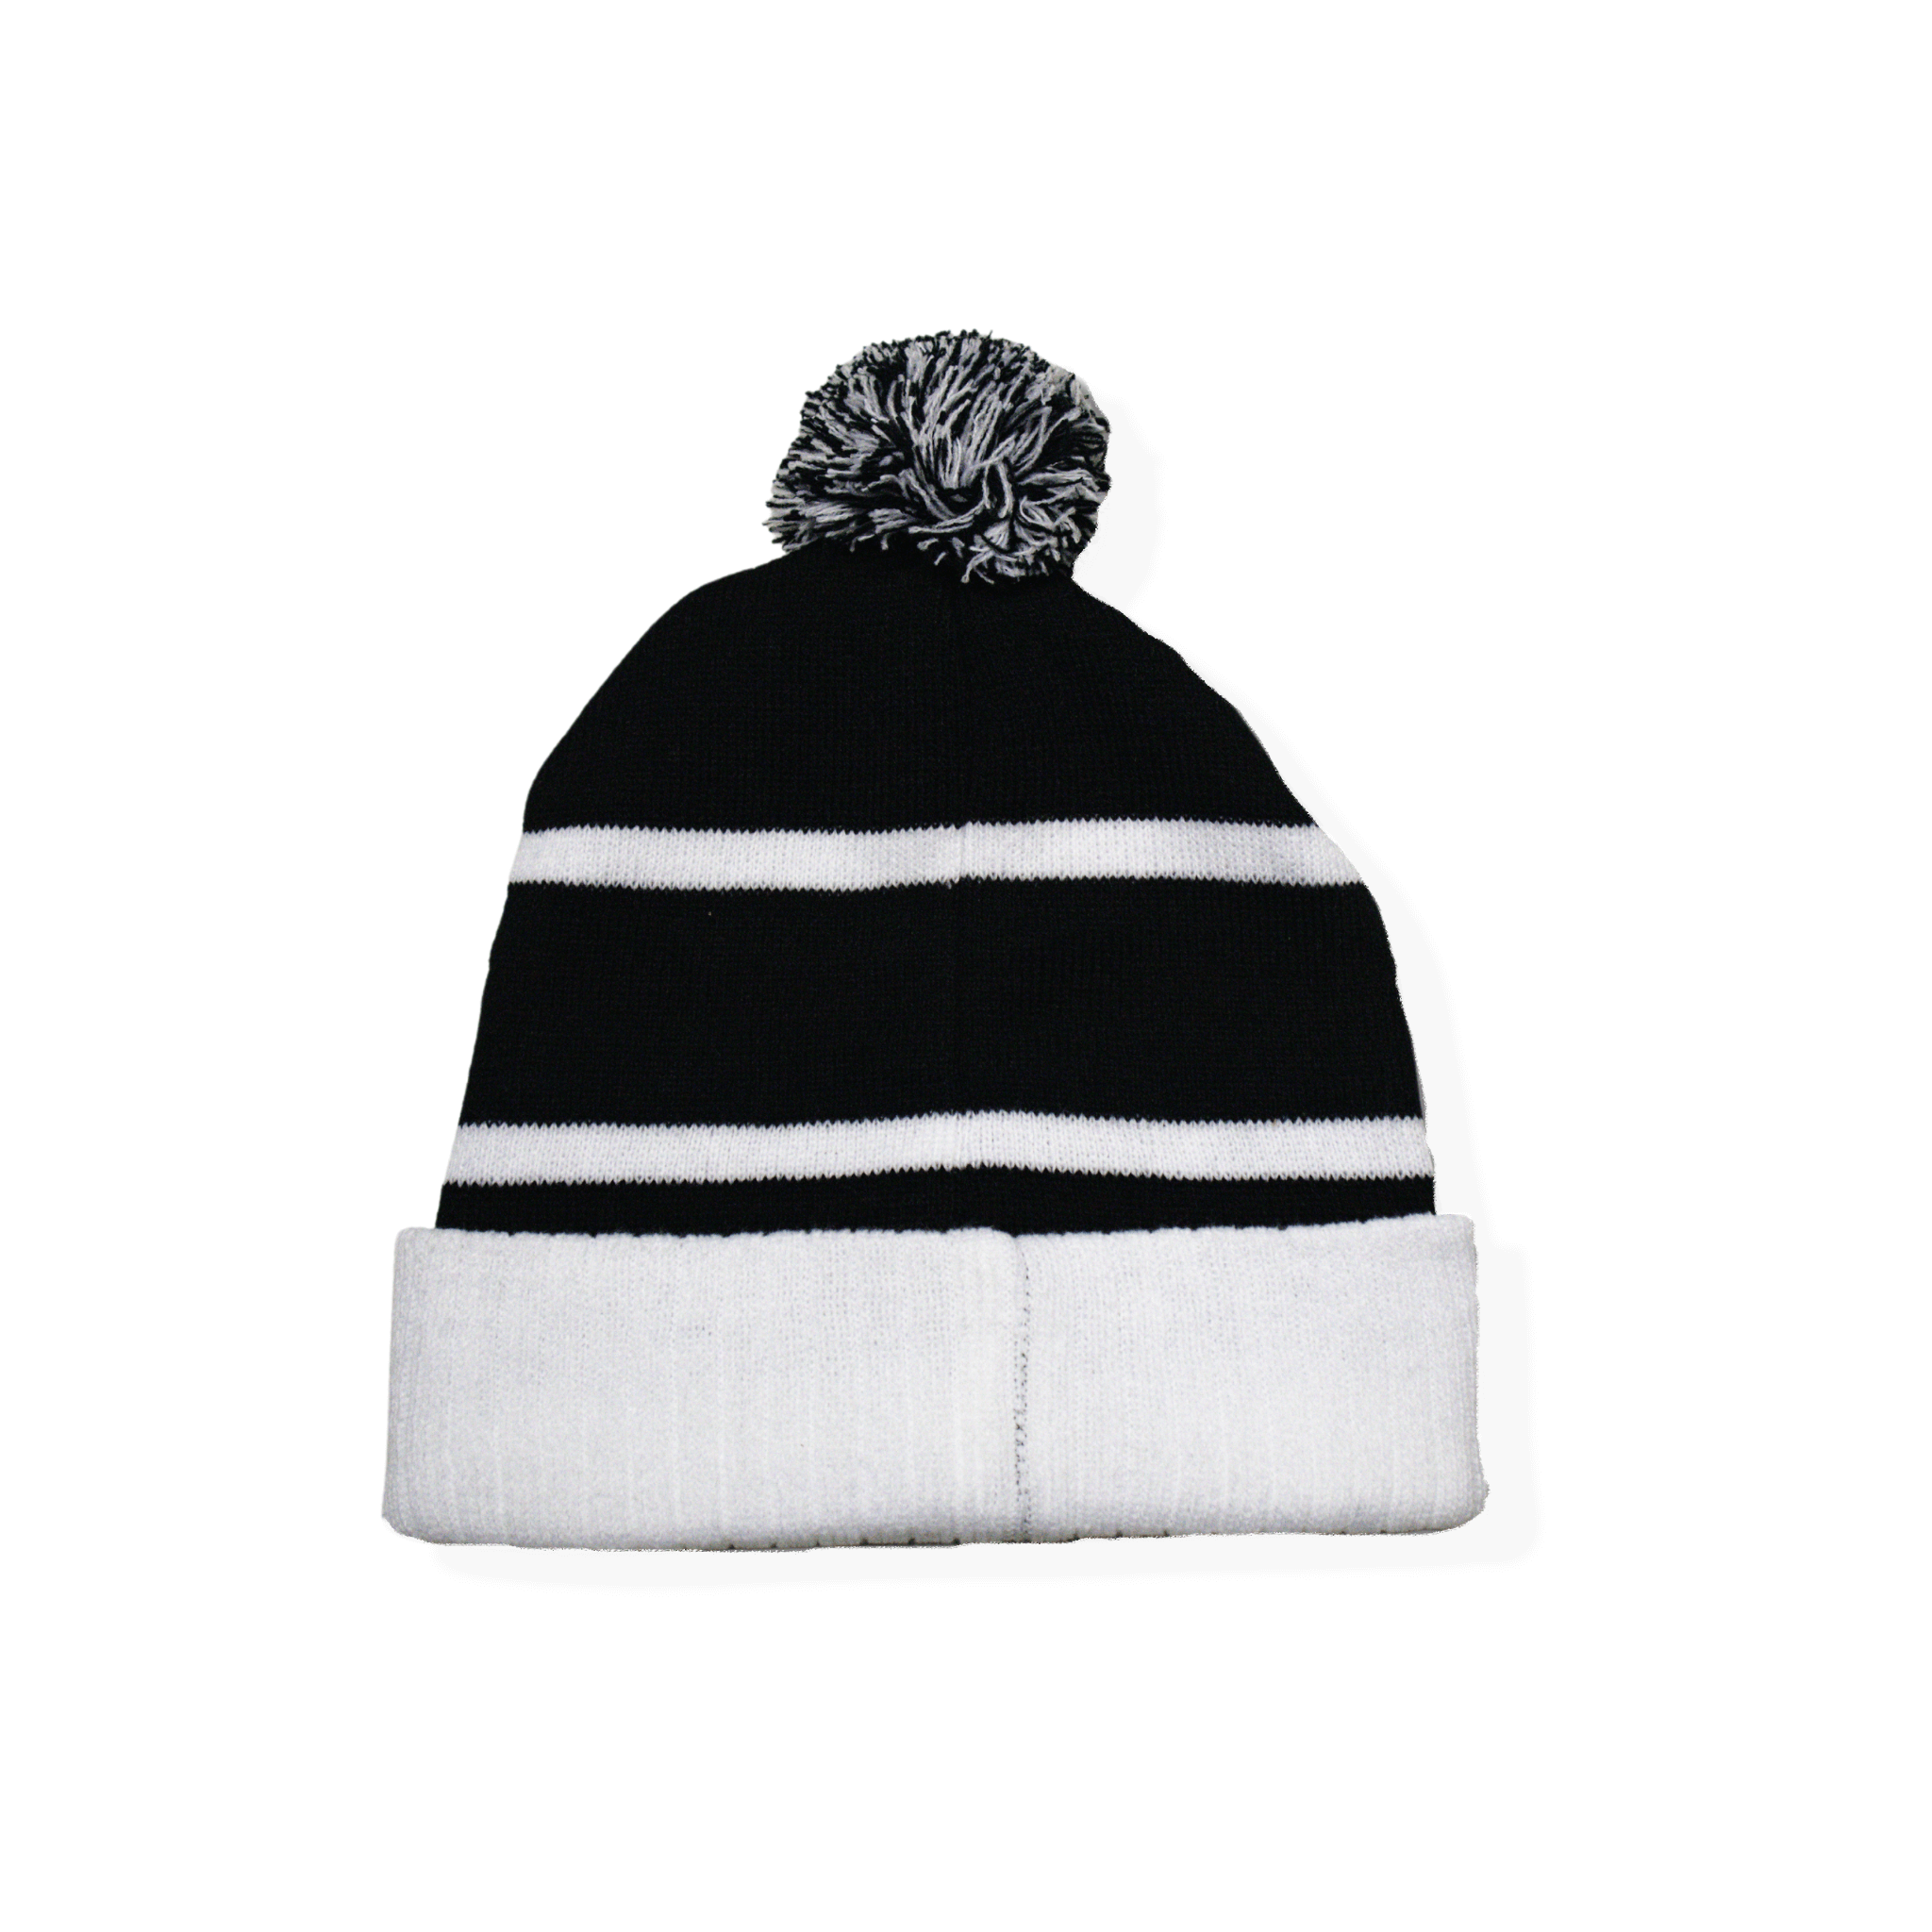 An image of the Acon Blk/Whi Beanie from the back.